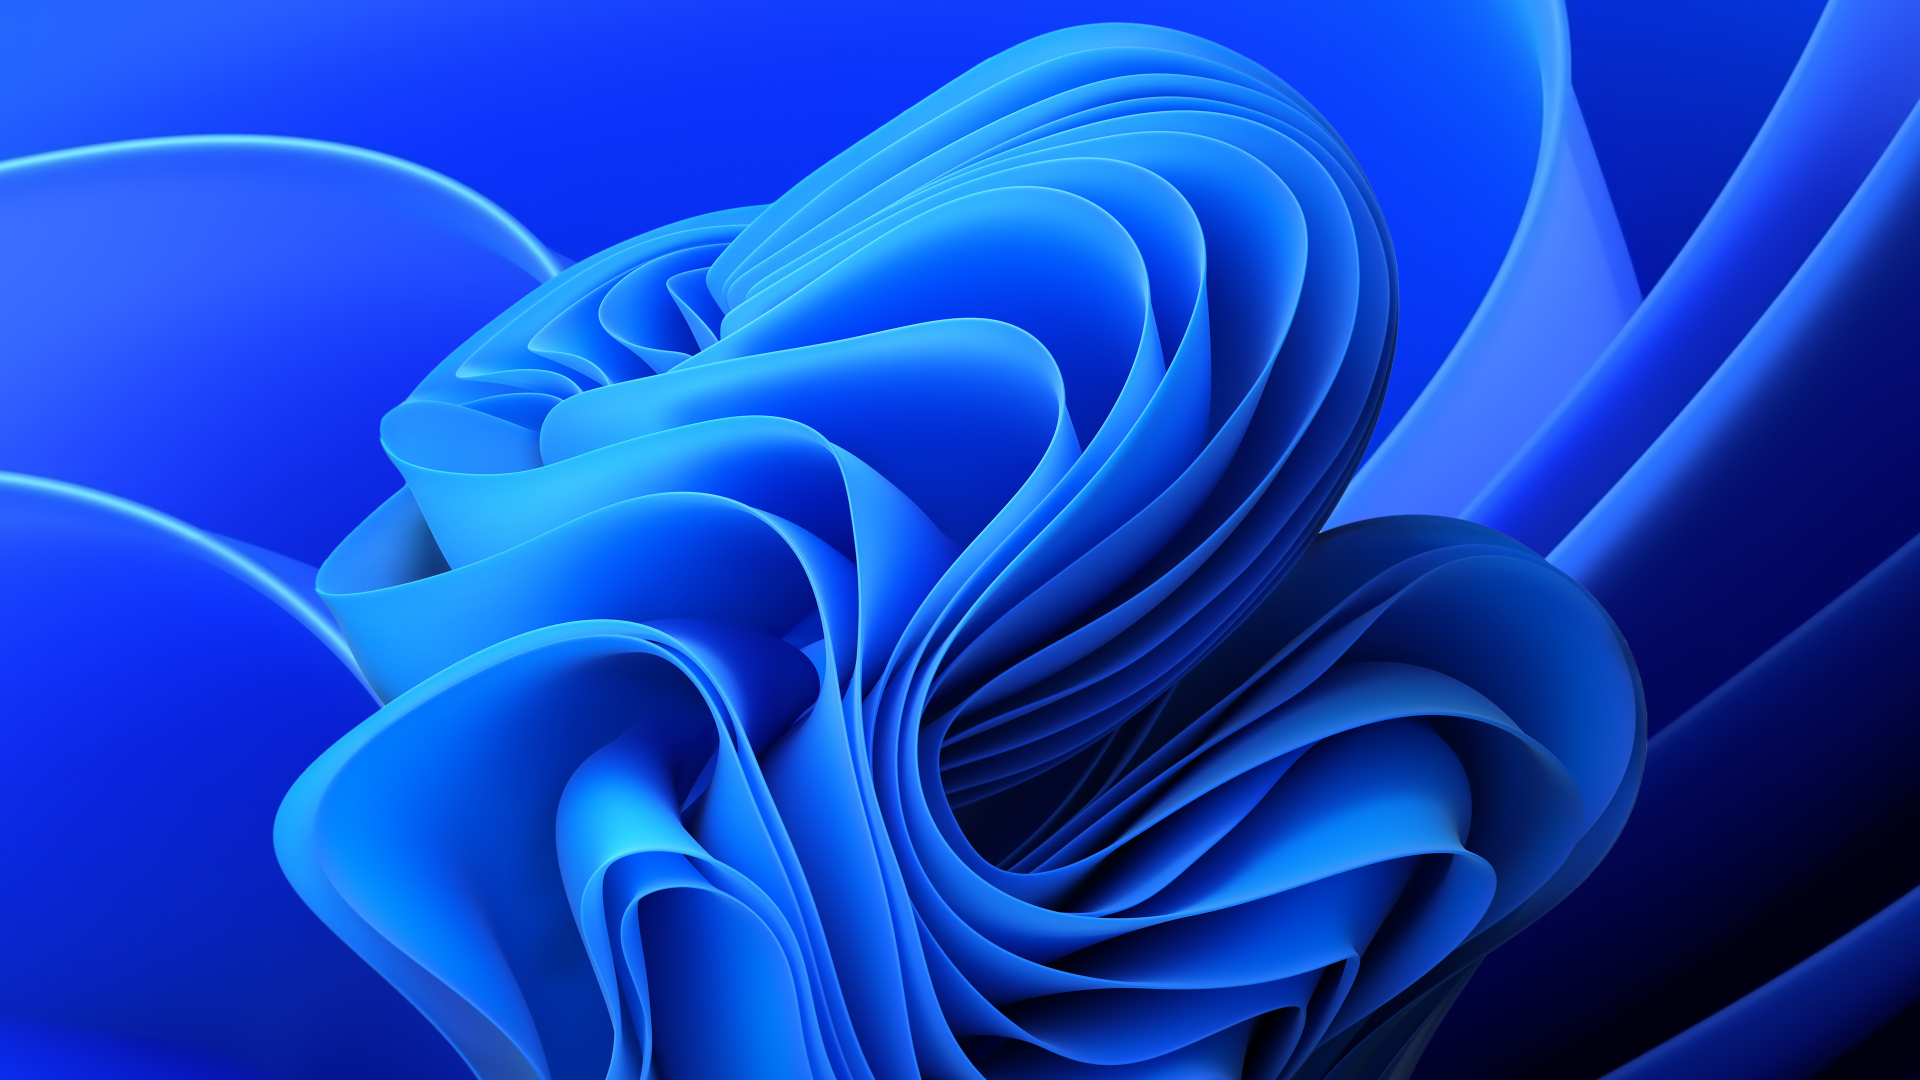 Windows 11 Wallpaper 4K, Blue background, Abstract